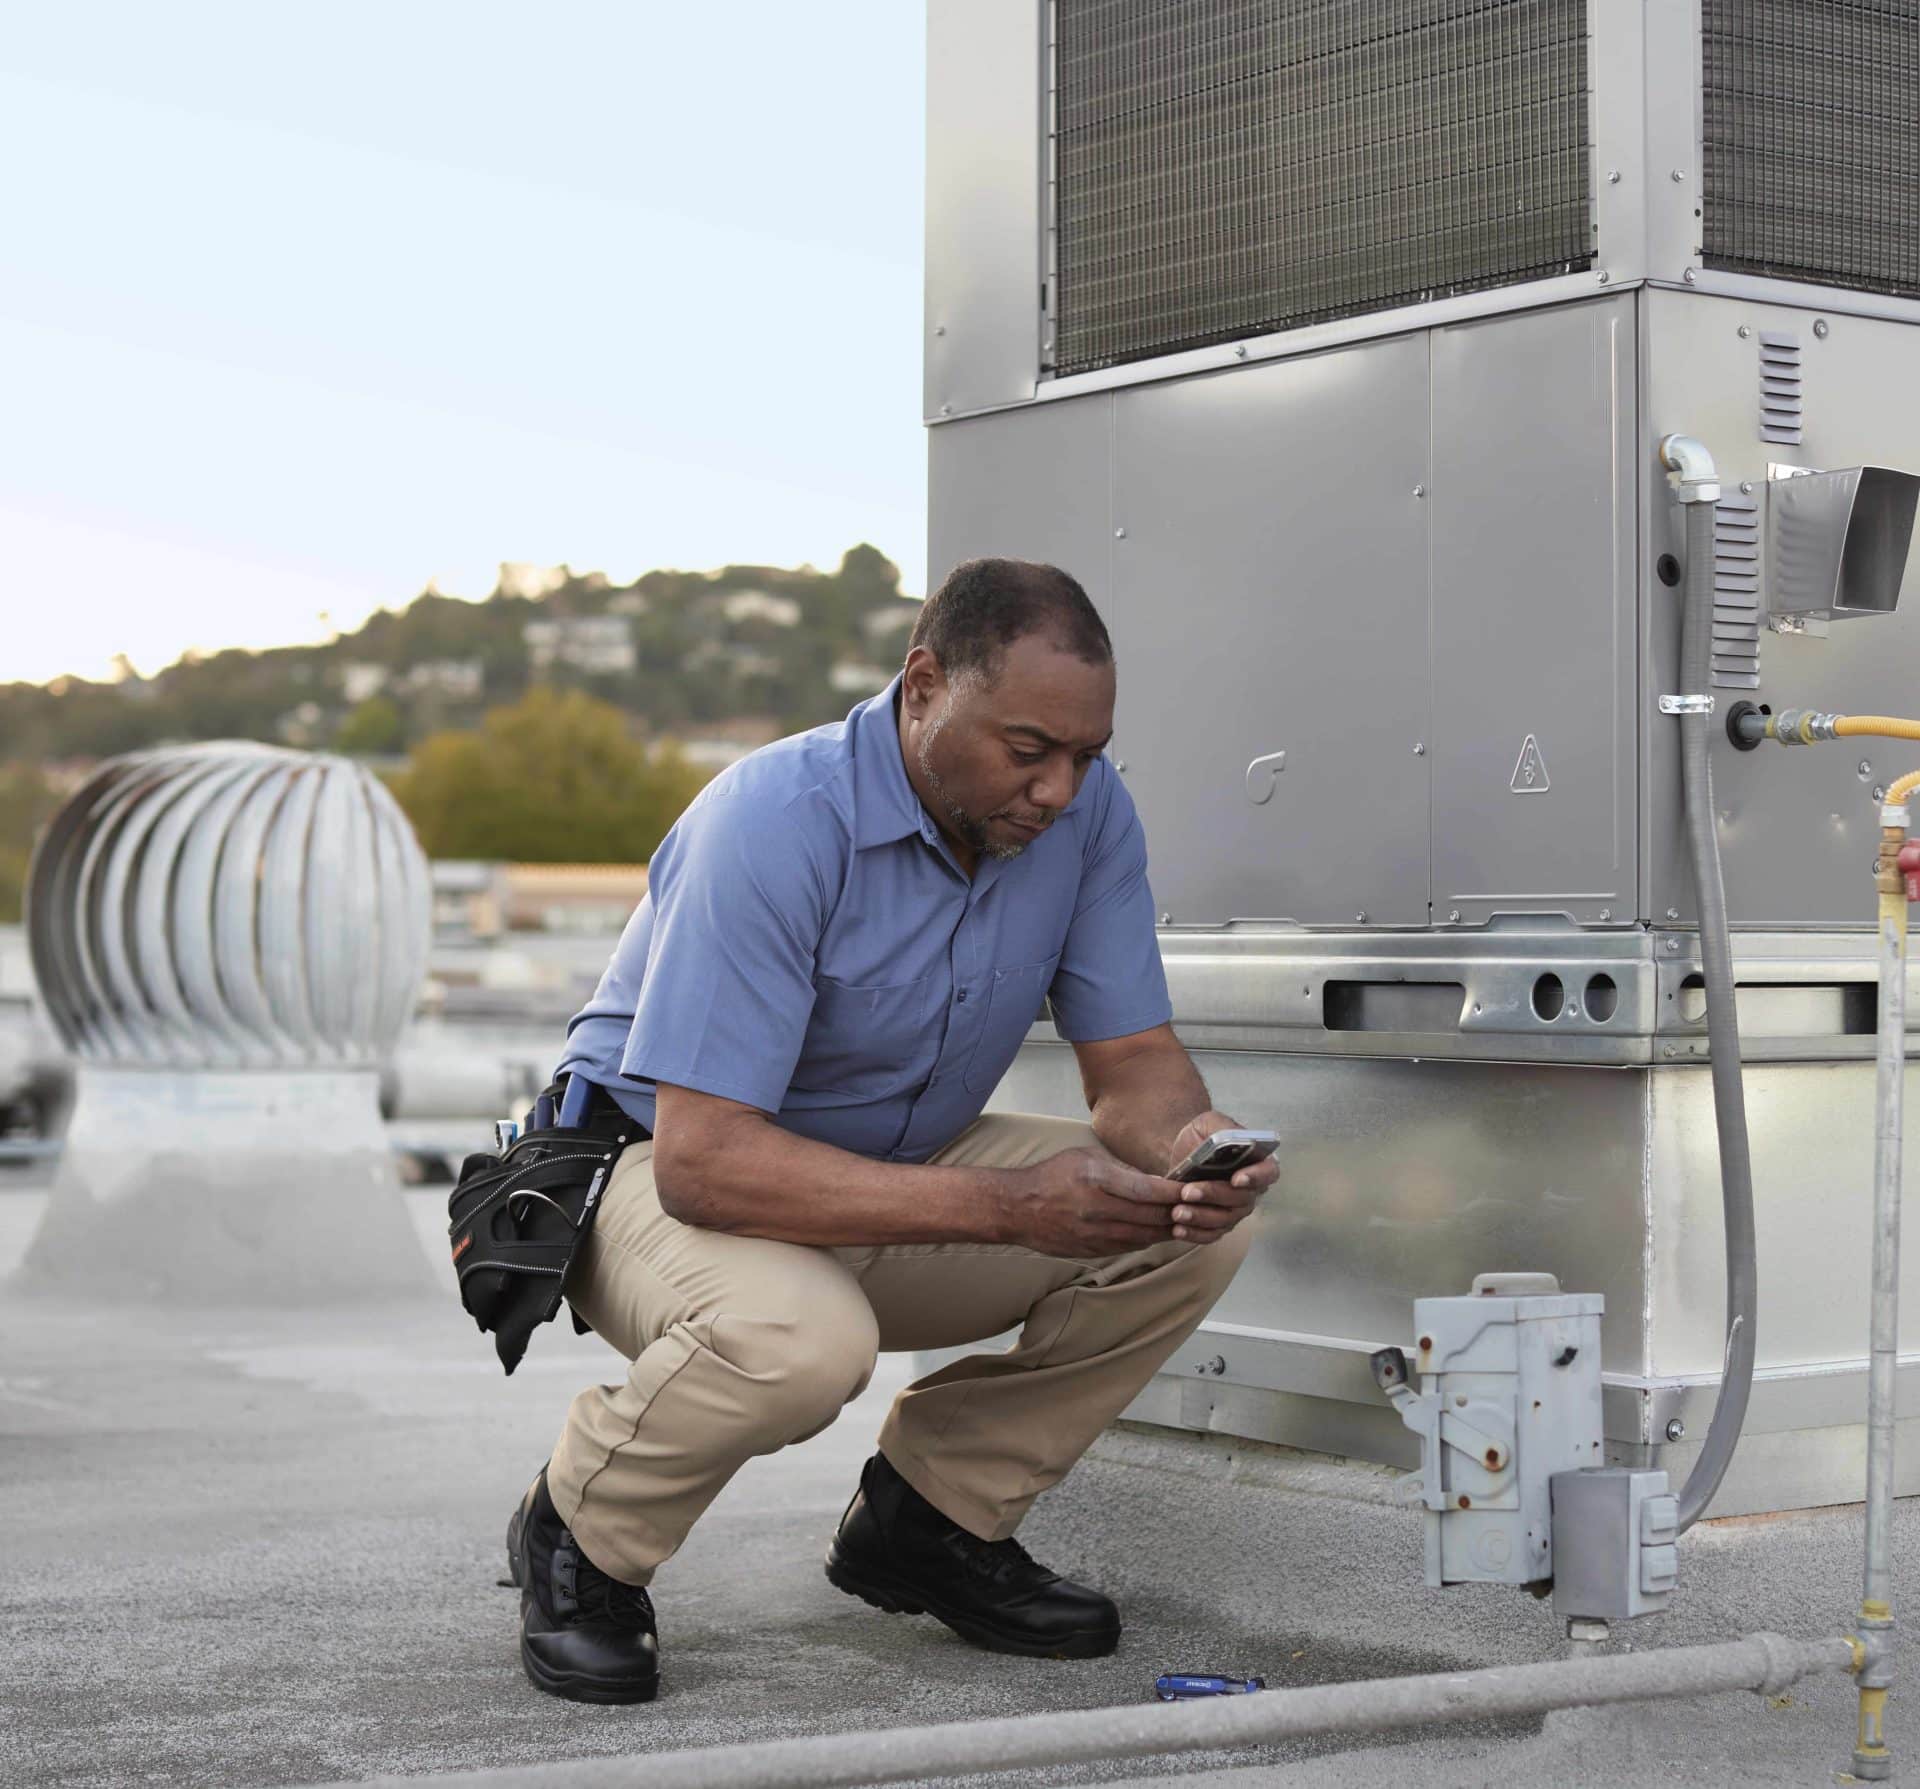 service provider crouching near industrial rooftop unit reviewing information on their smartphone